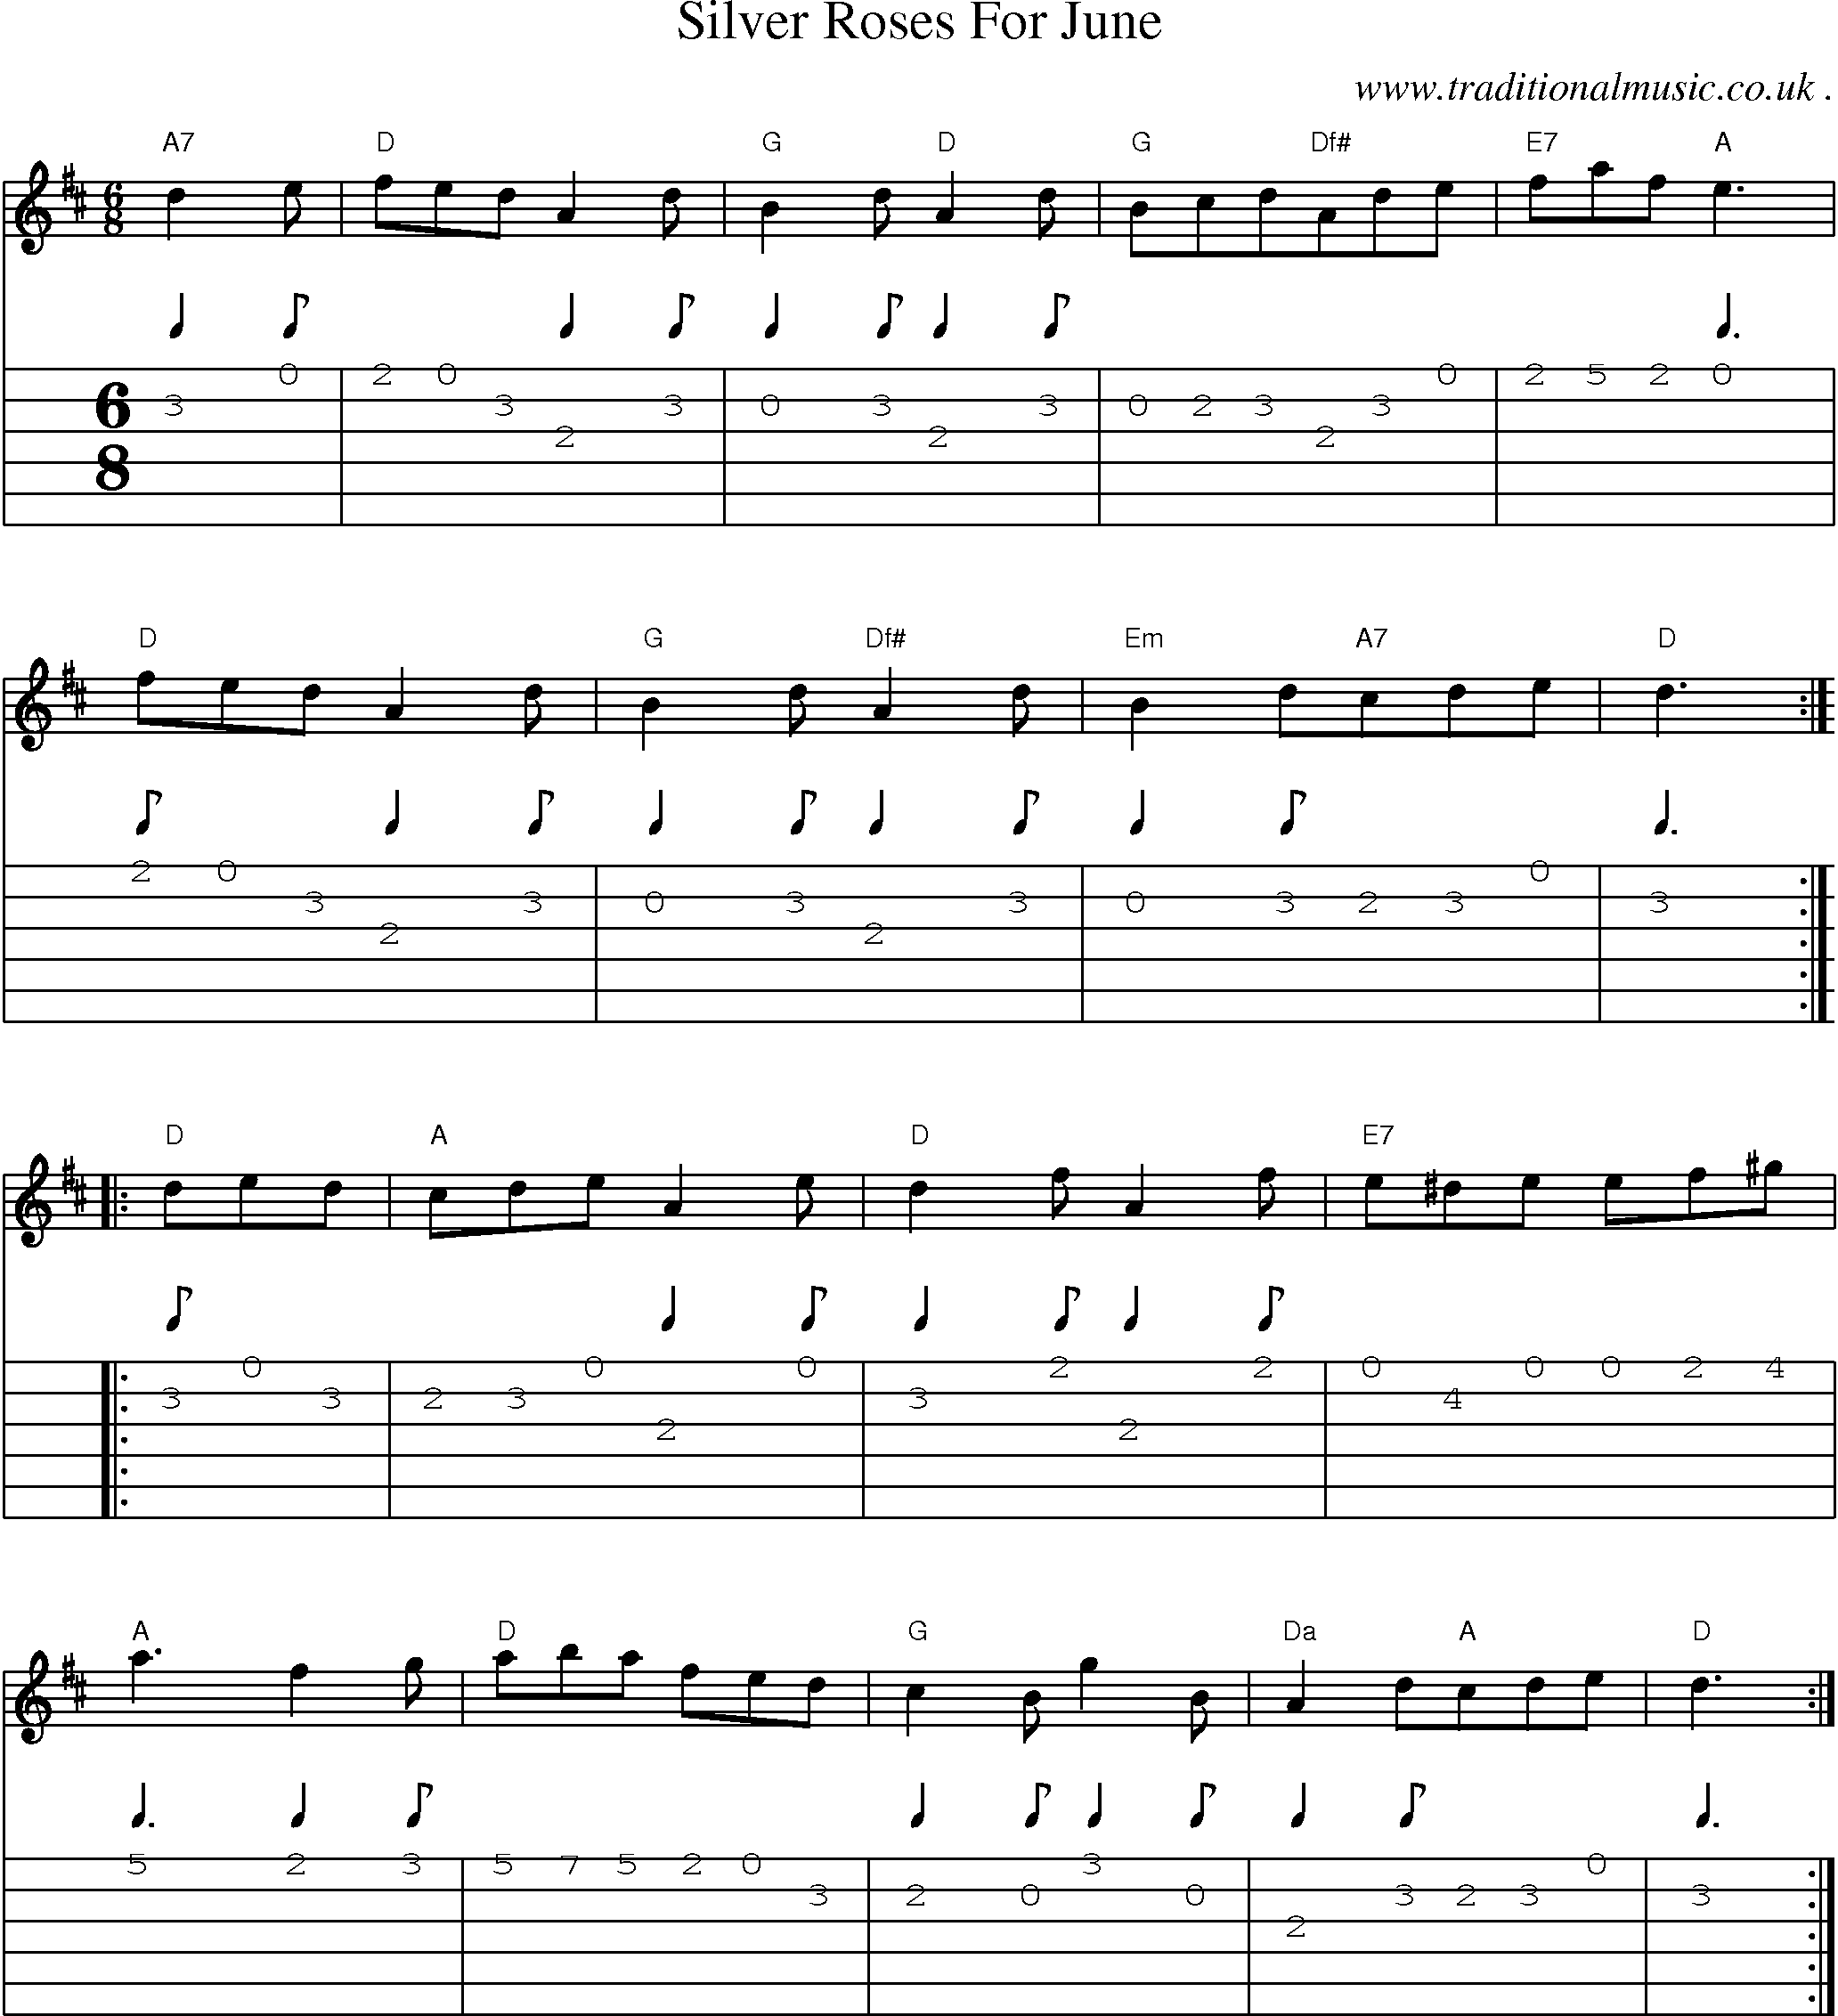 Sheet-Music and Guitar Tabs for Silver Roses For June